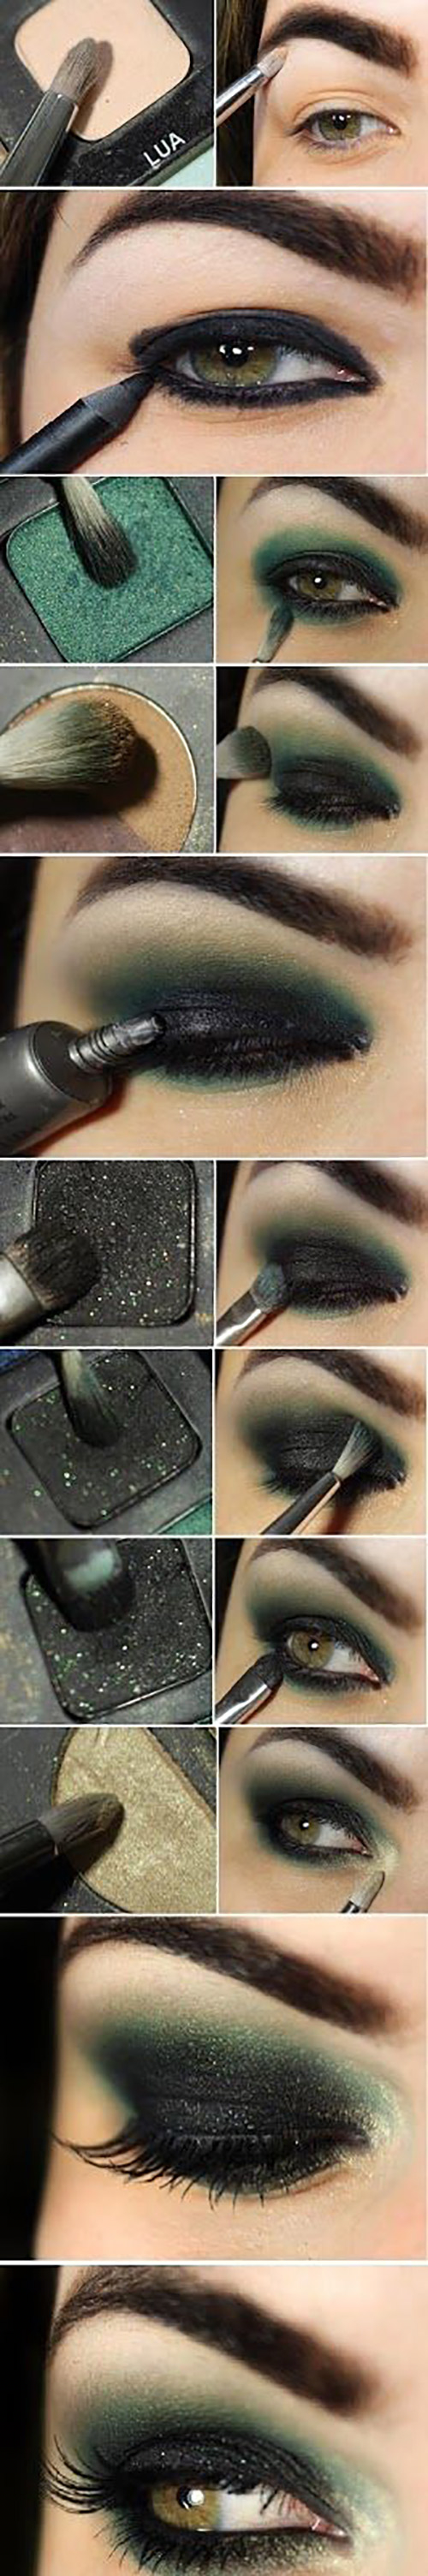 How To Smokey Eye Makeup How To Do Smokey Eye Makeup Top 10 Tutorial Pictures For 2019